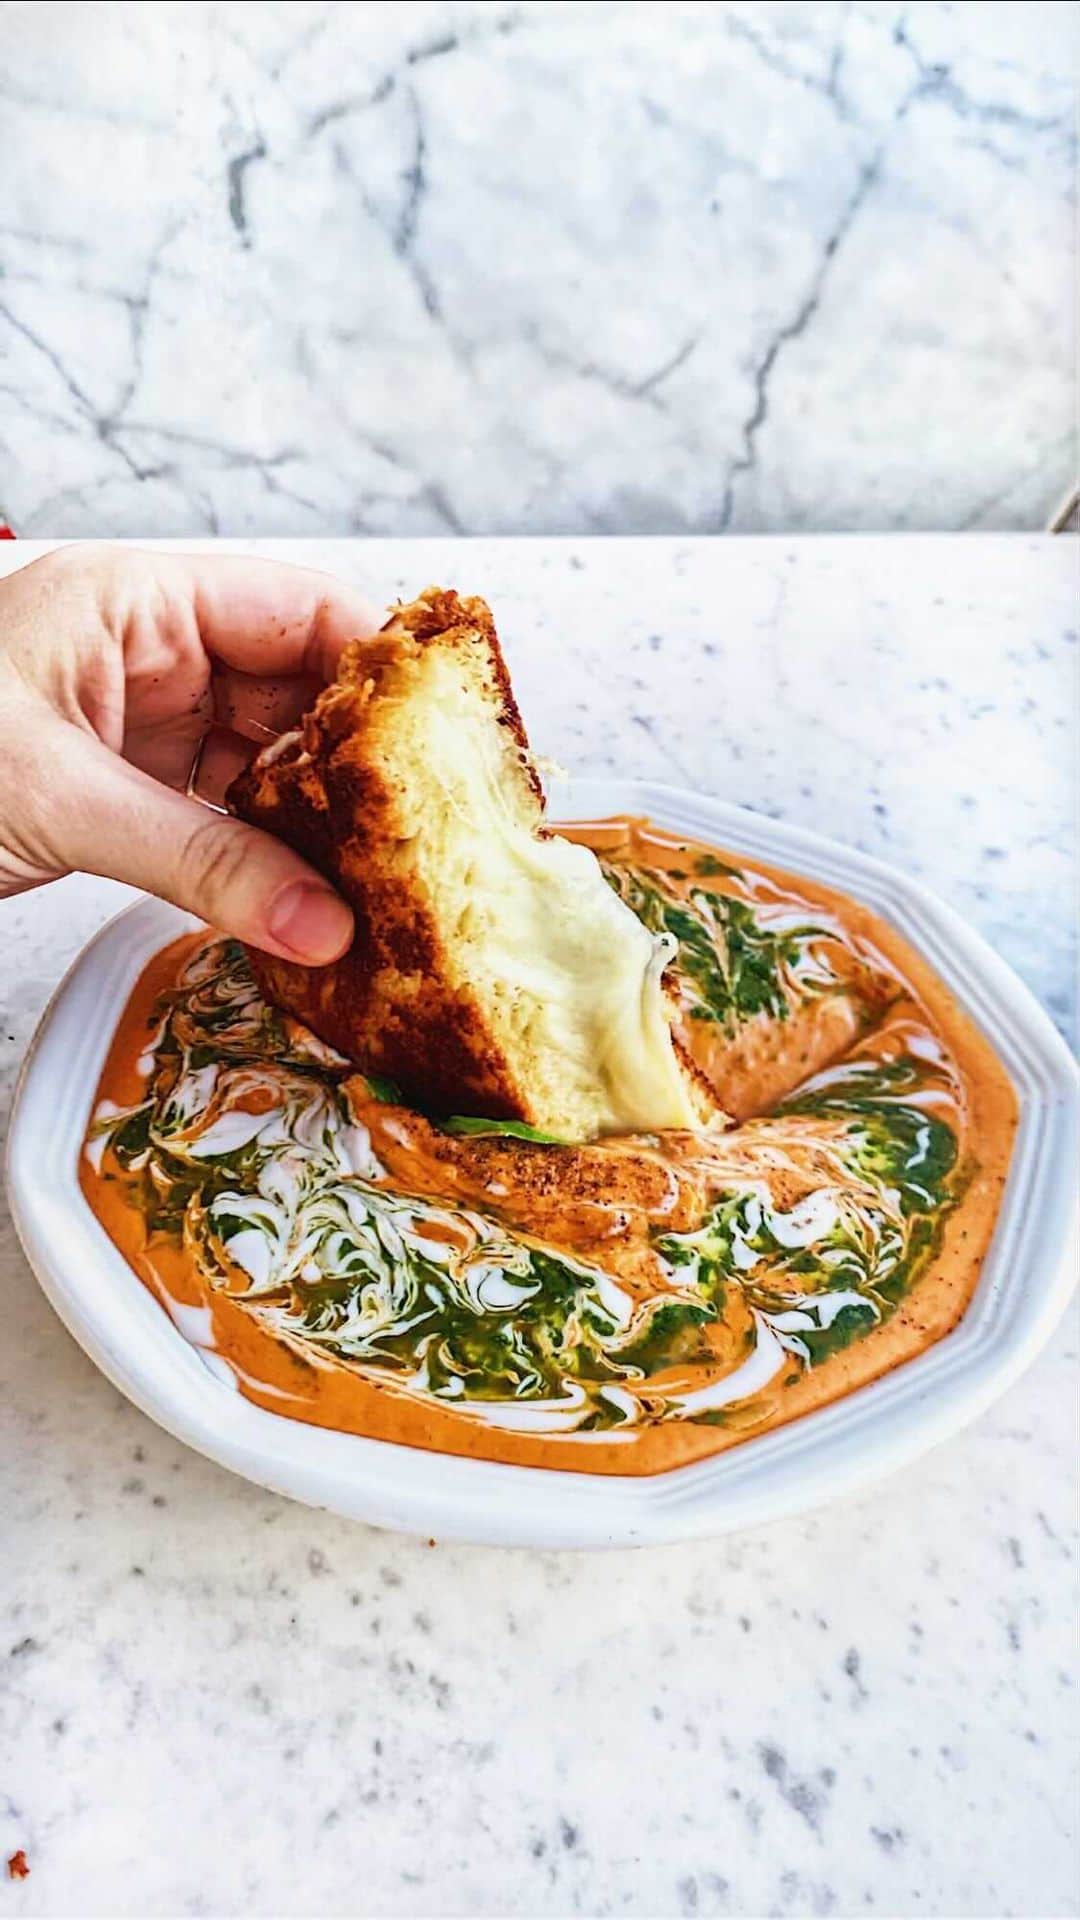 Food52のインスタグラム：「Resident @carolinagelen's newest soup recipe goes out to all of the tomato and garlic lovers of the world! All you need to do is roast a few ingredients for 30 minutes (including a whole head of garlic and herbs), blend it all up, and dinner is served (along with a melty grilled cheese). Grab her Tomato Soup recipe at the link in bio. #f52community」